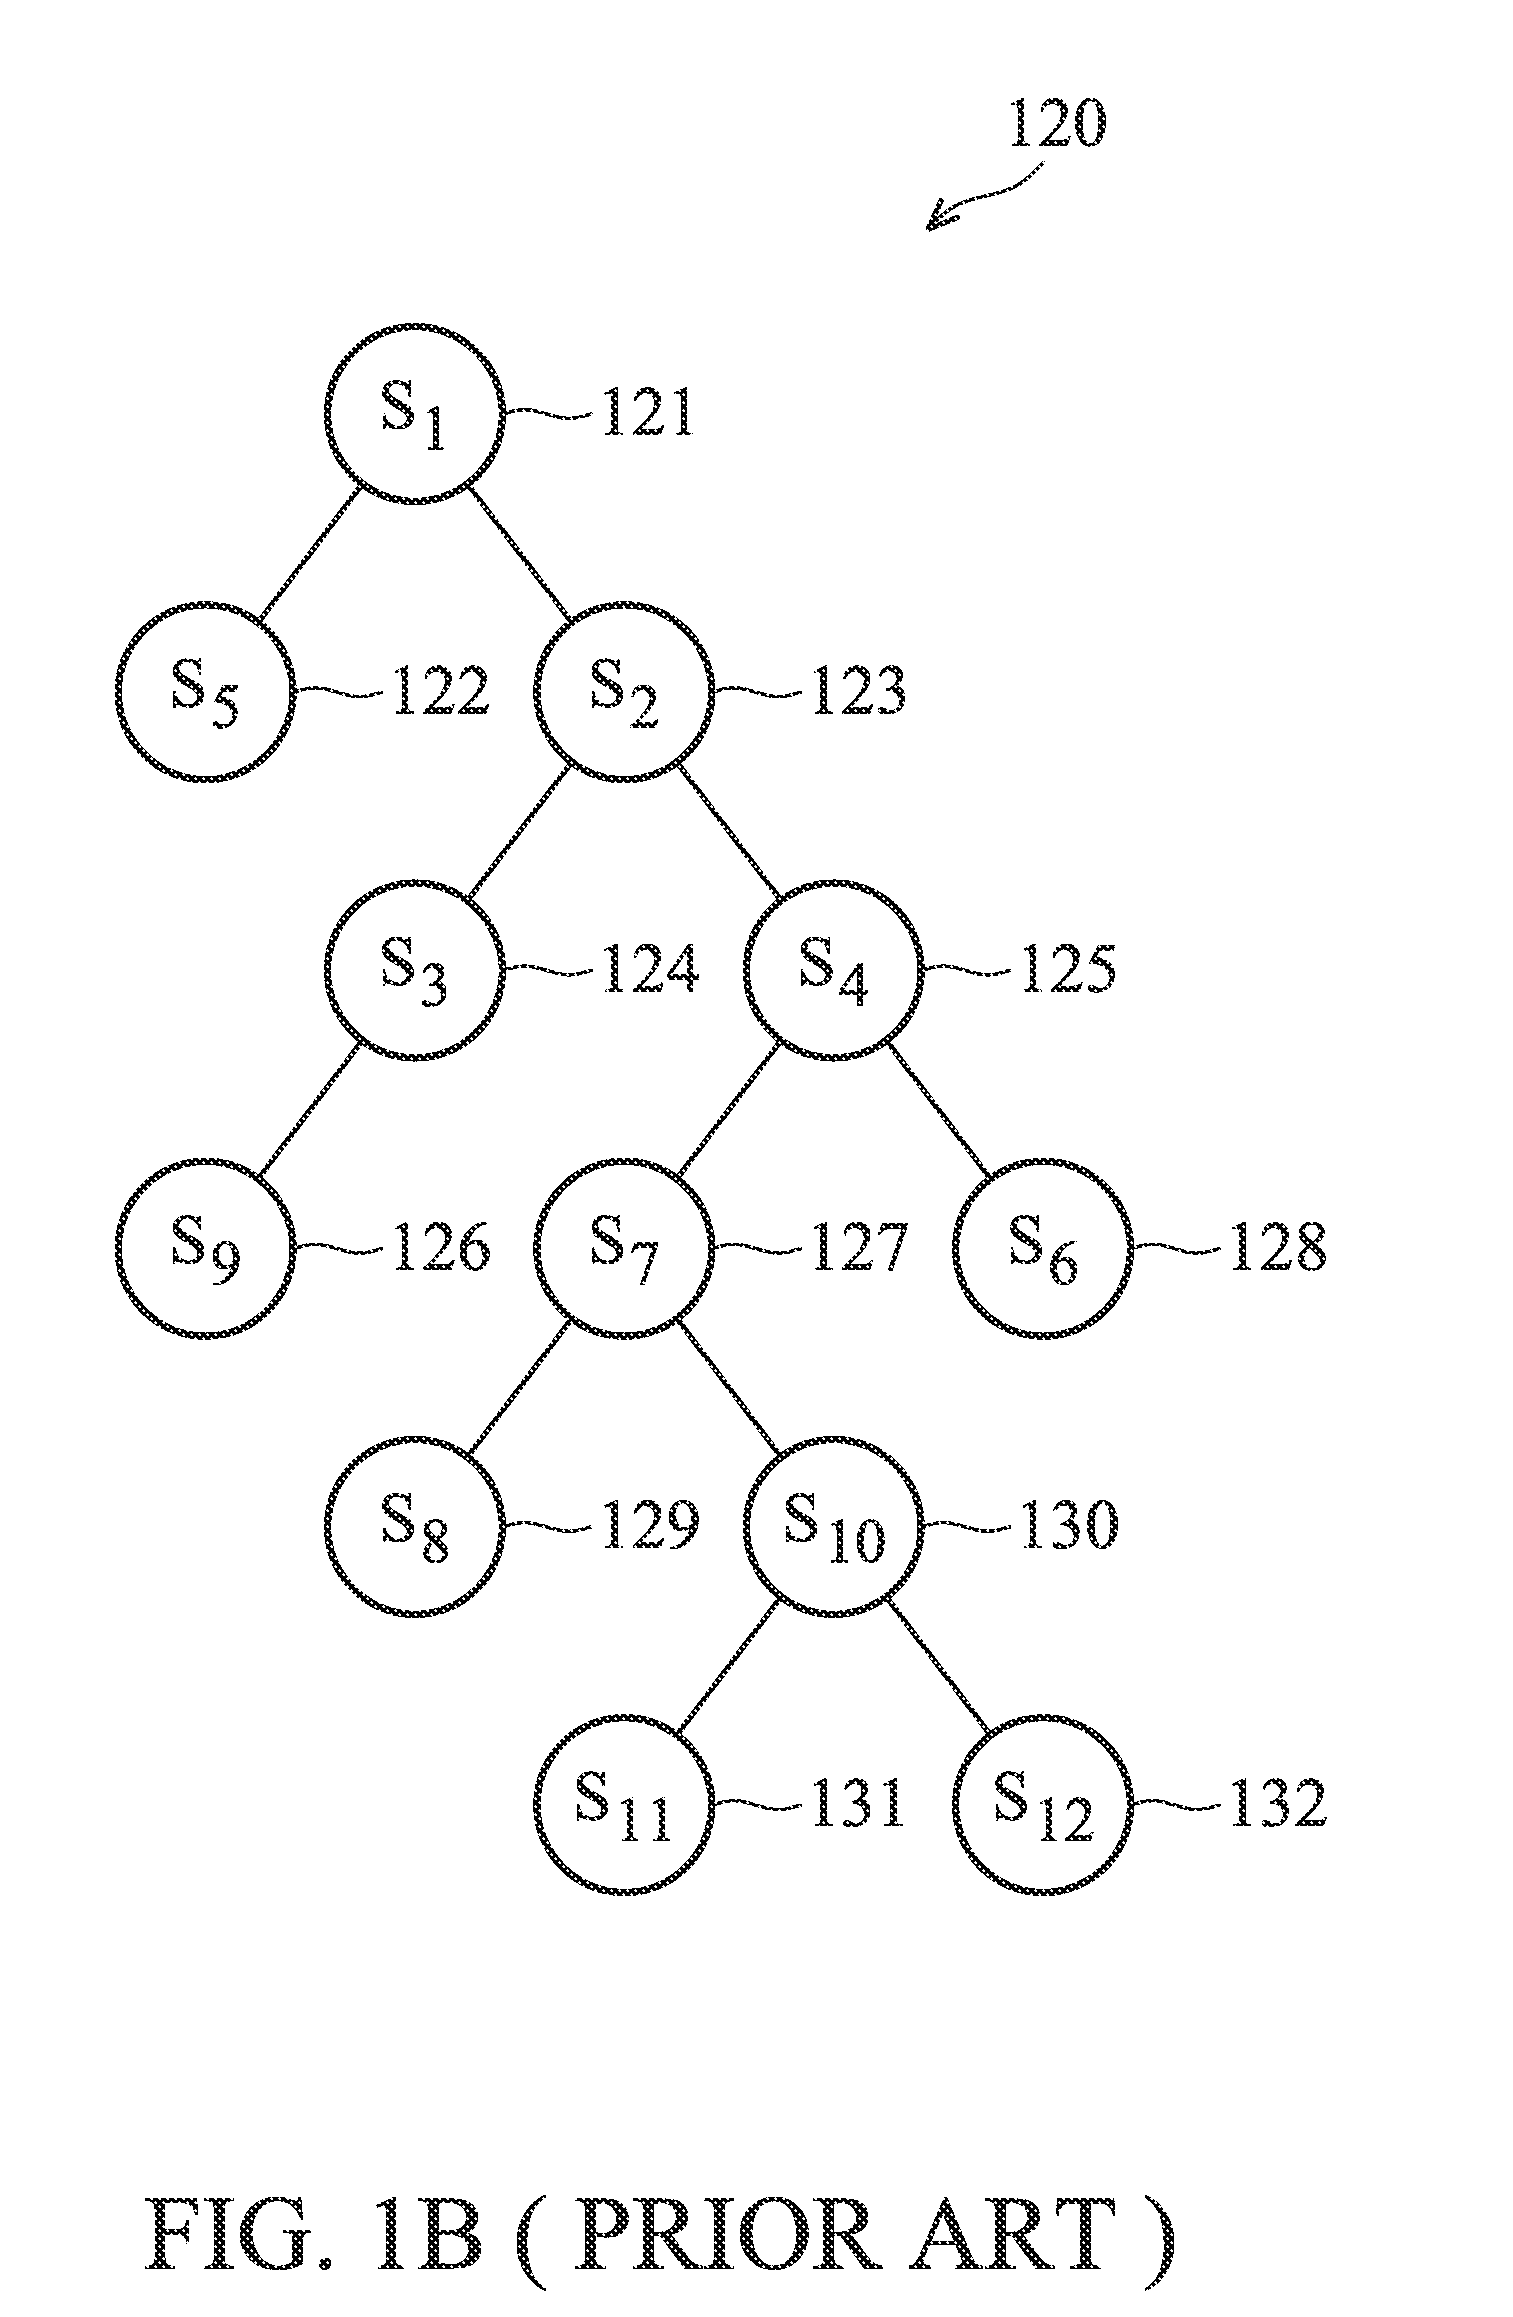 Data storage device and block selection method for a flash memory